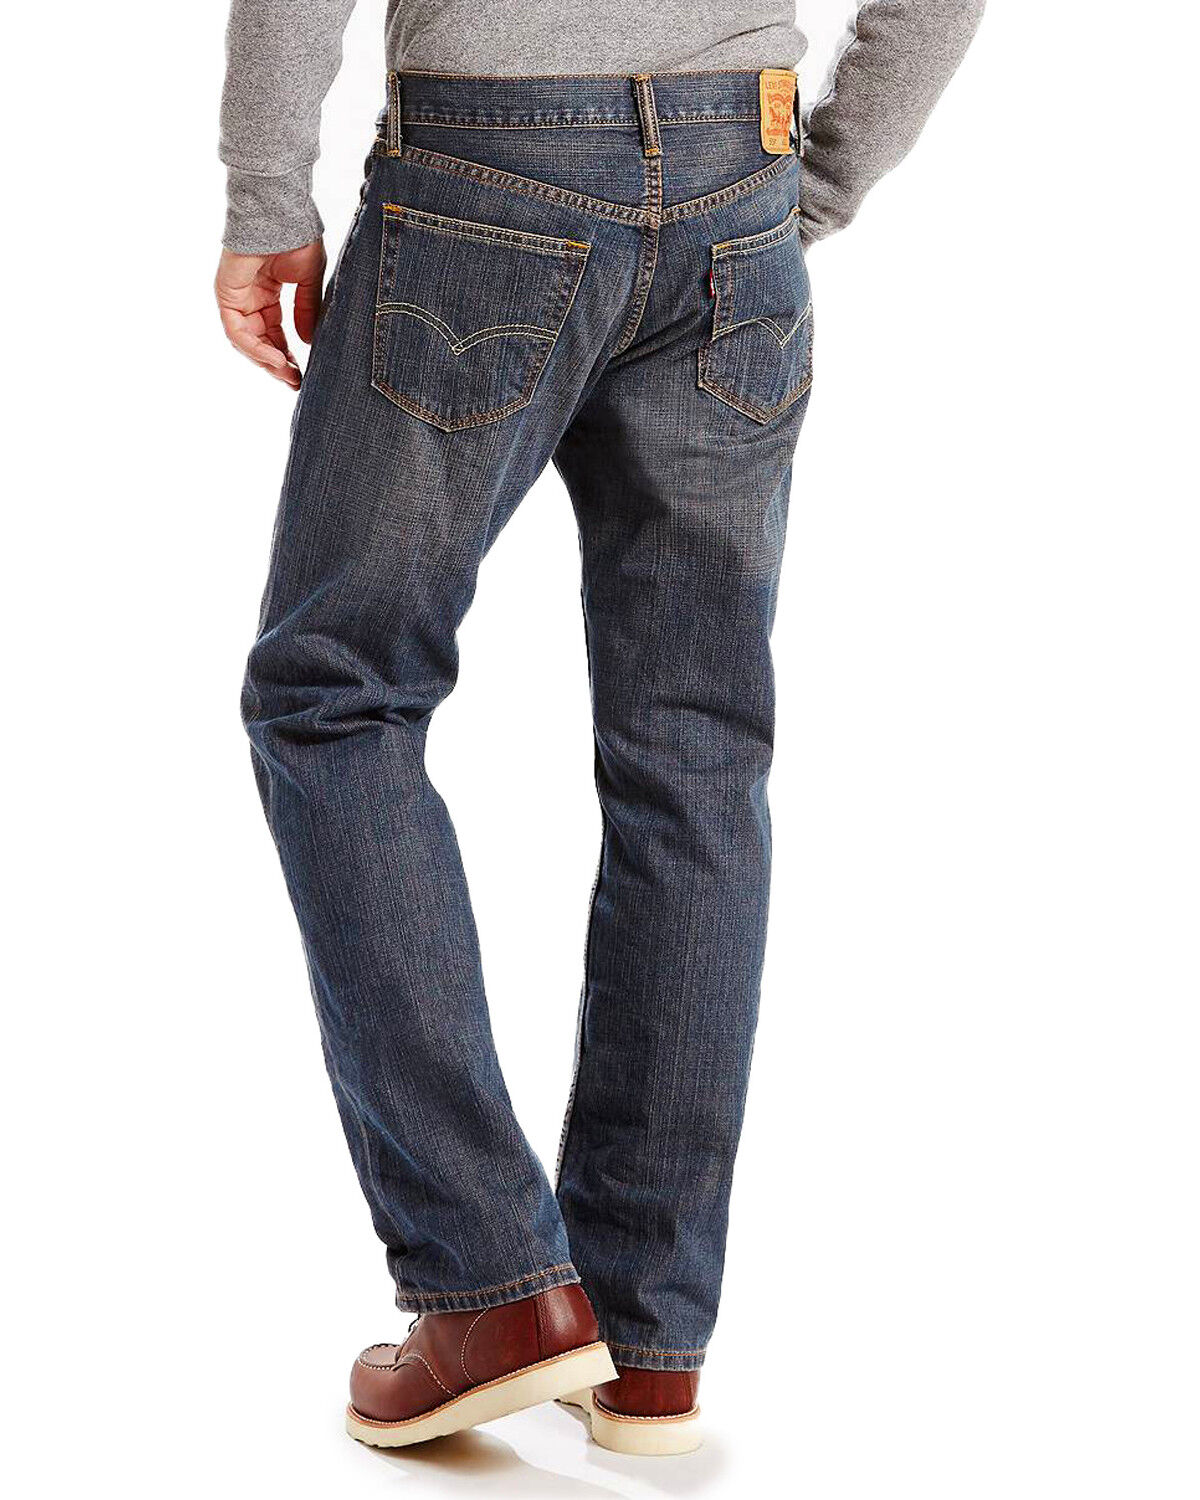 Levis 559 Discontinued Outlet, SAVE 52%.